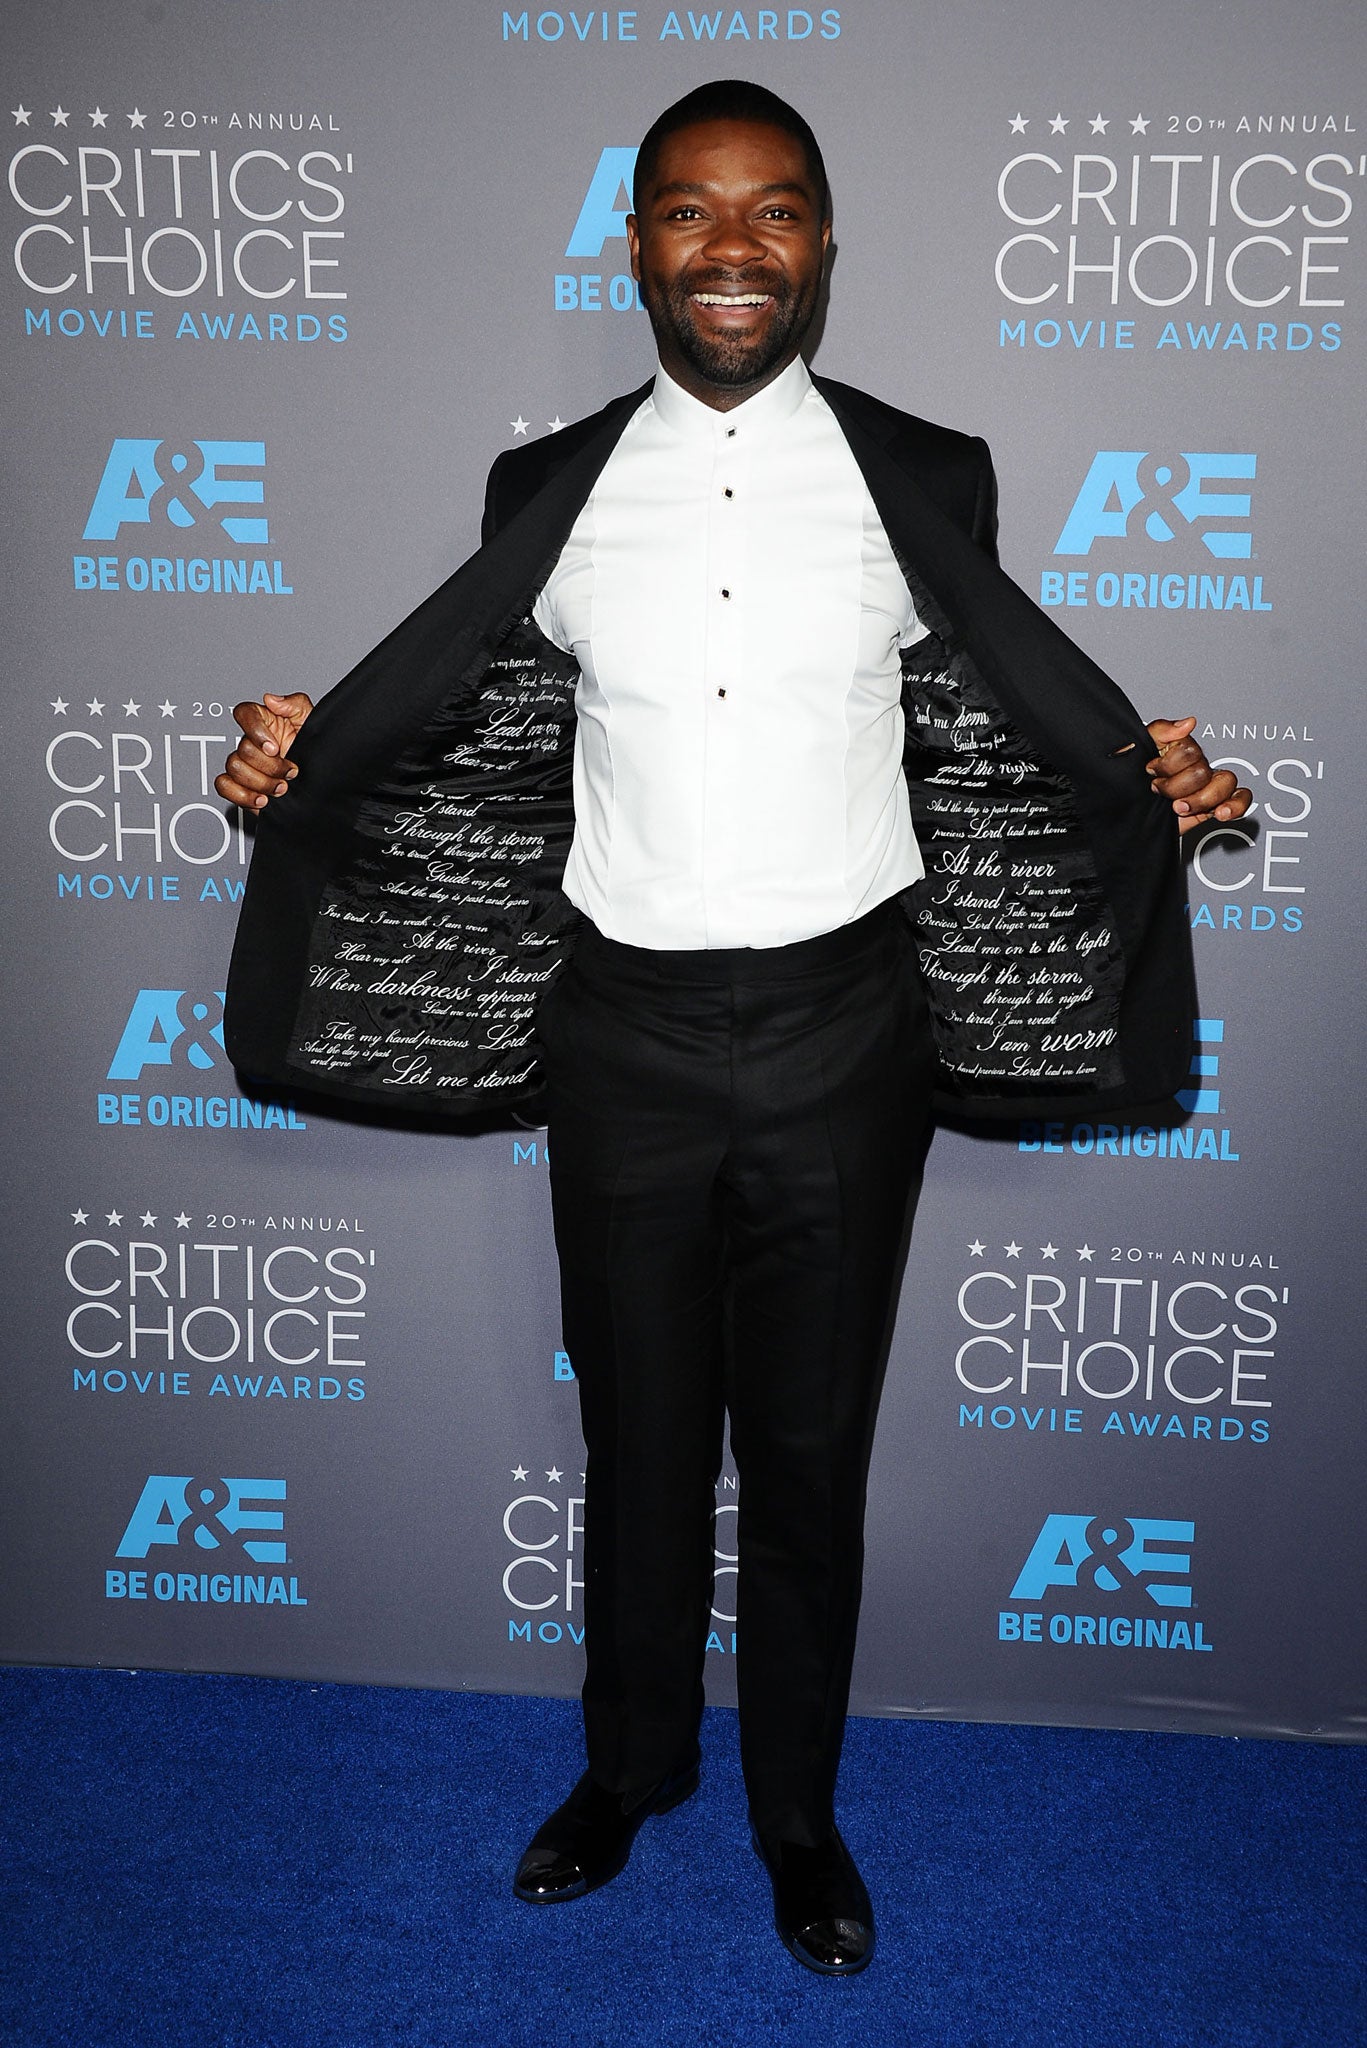 Homage: Oyelowo's jacket features the lyrics to one of Martin Luther King's favourite songs